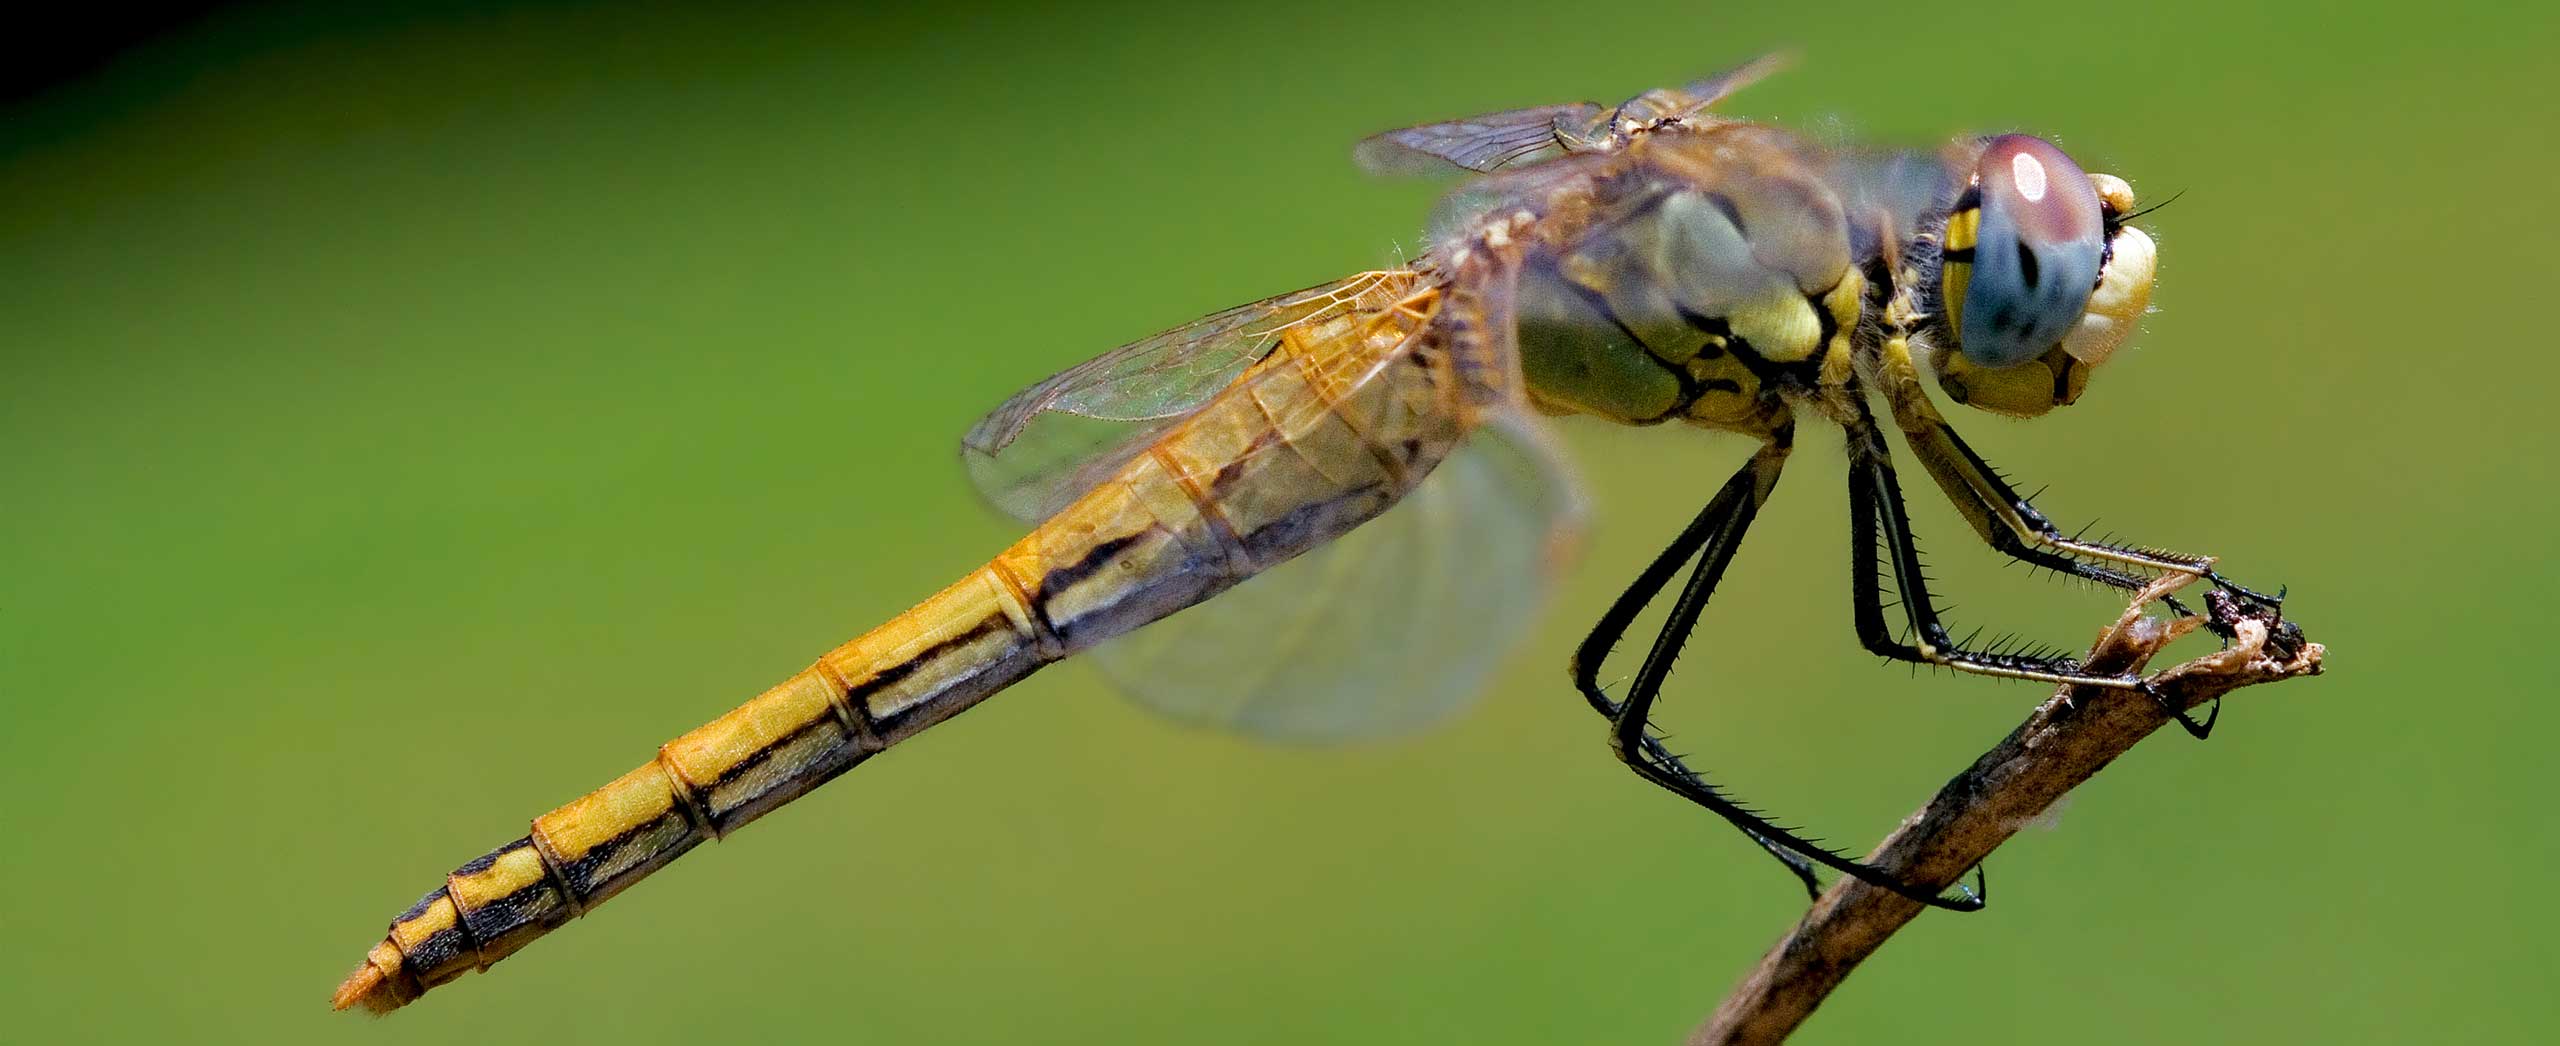 The Meaning of a Dragonfly: What Does a Dragonfly Symbolize?